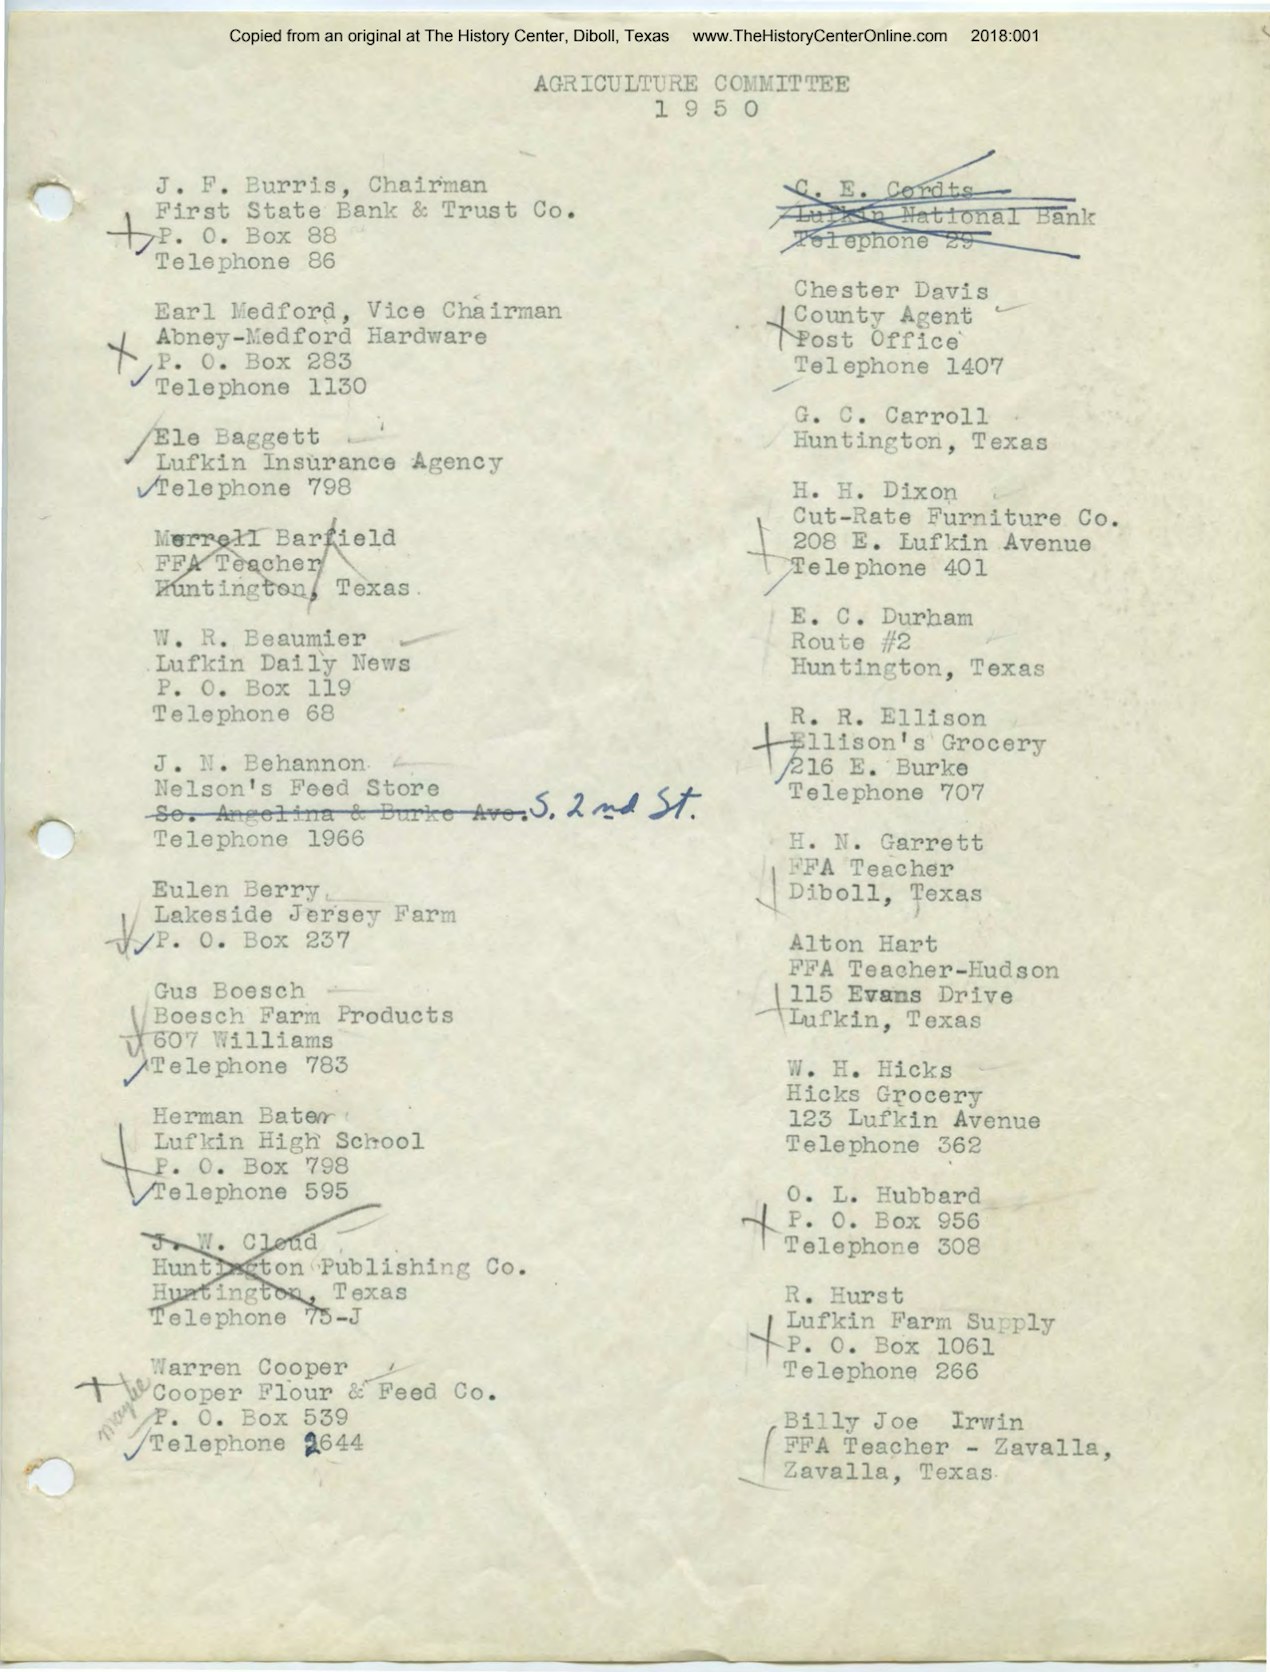 1950-1953 ACCM Committee Minutes